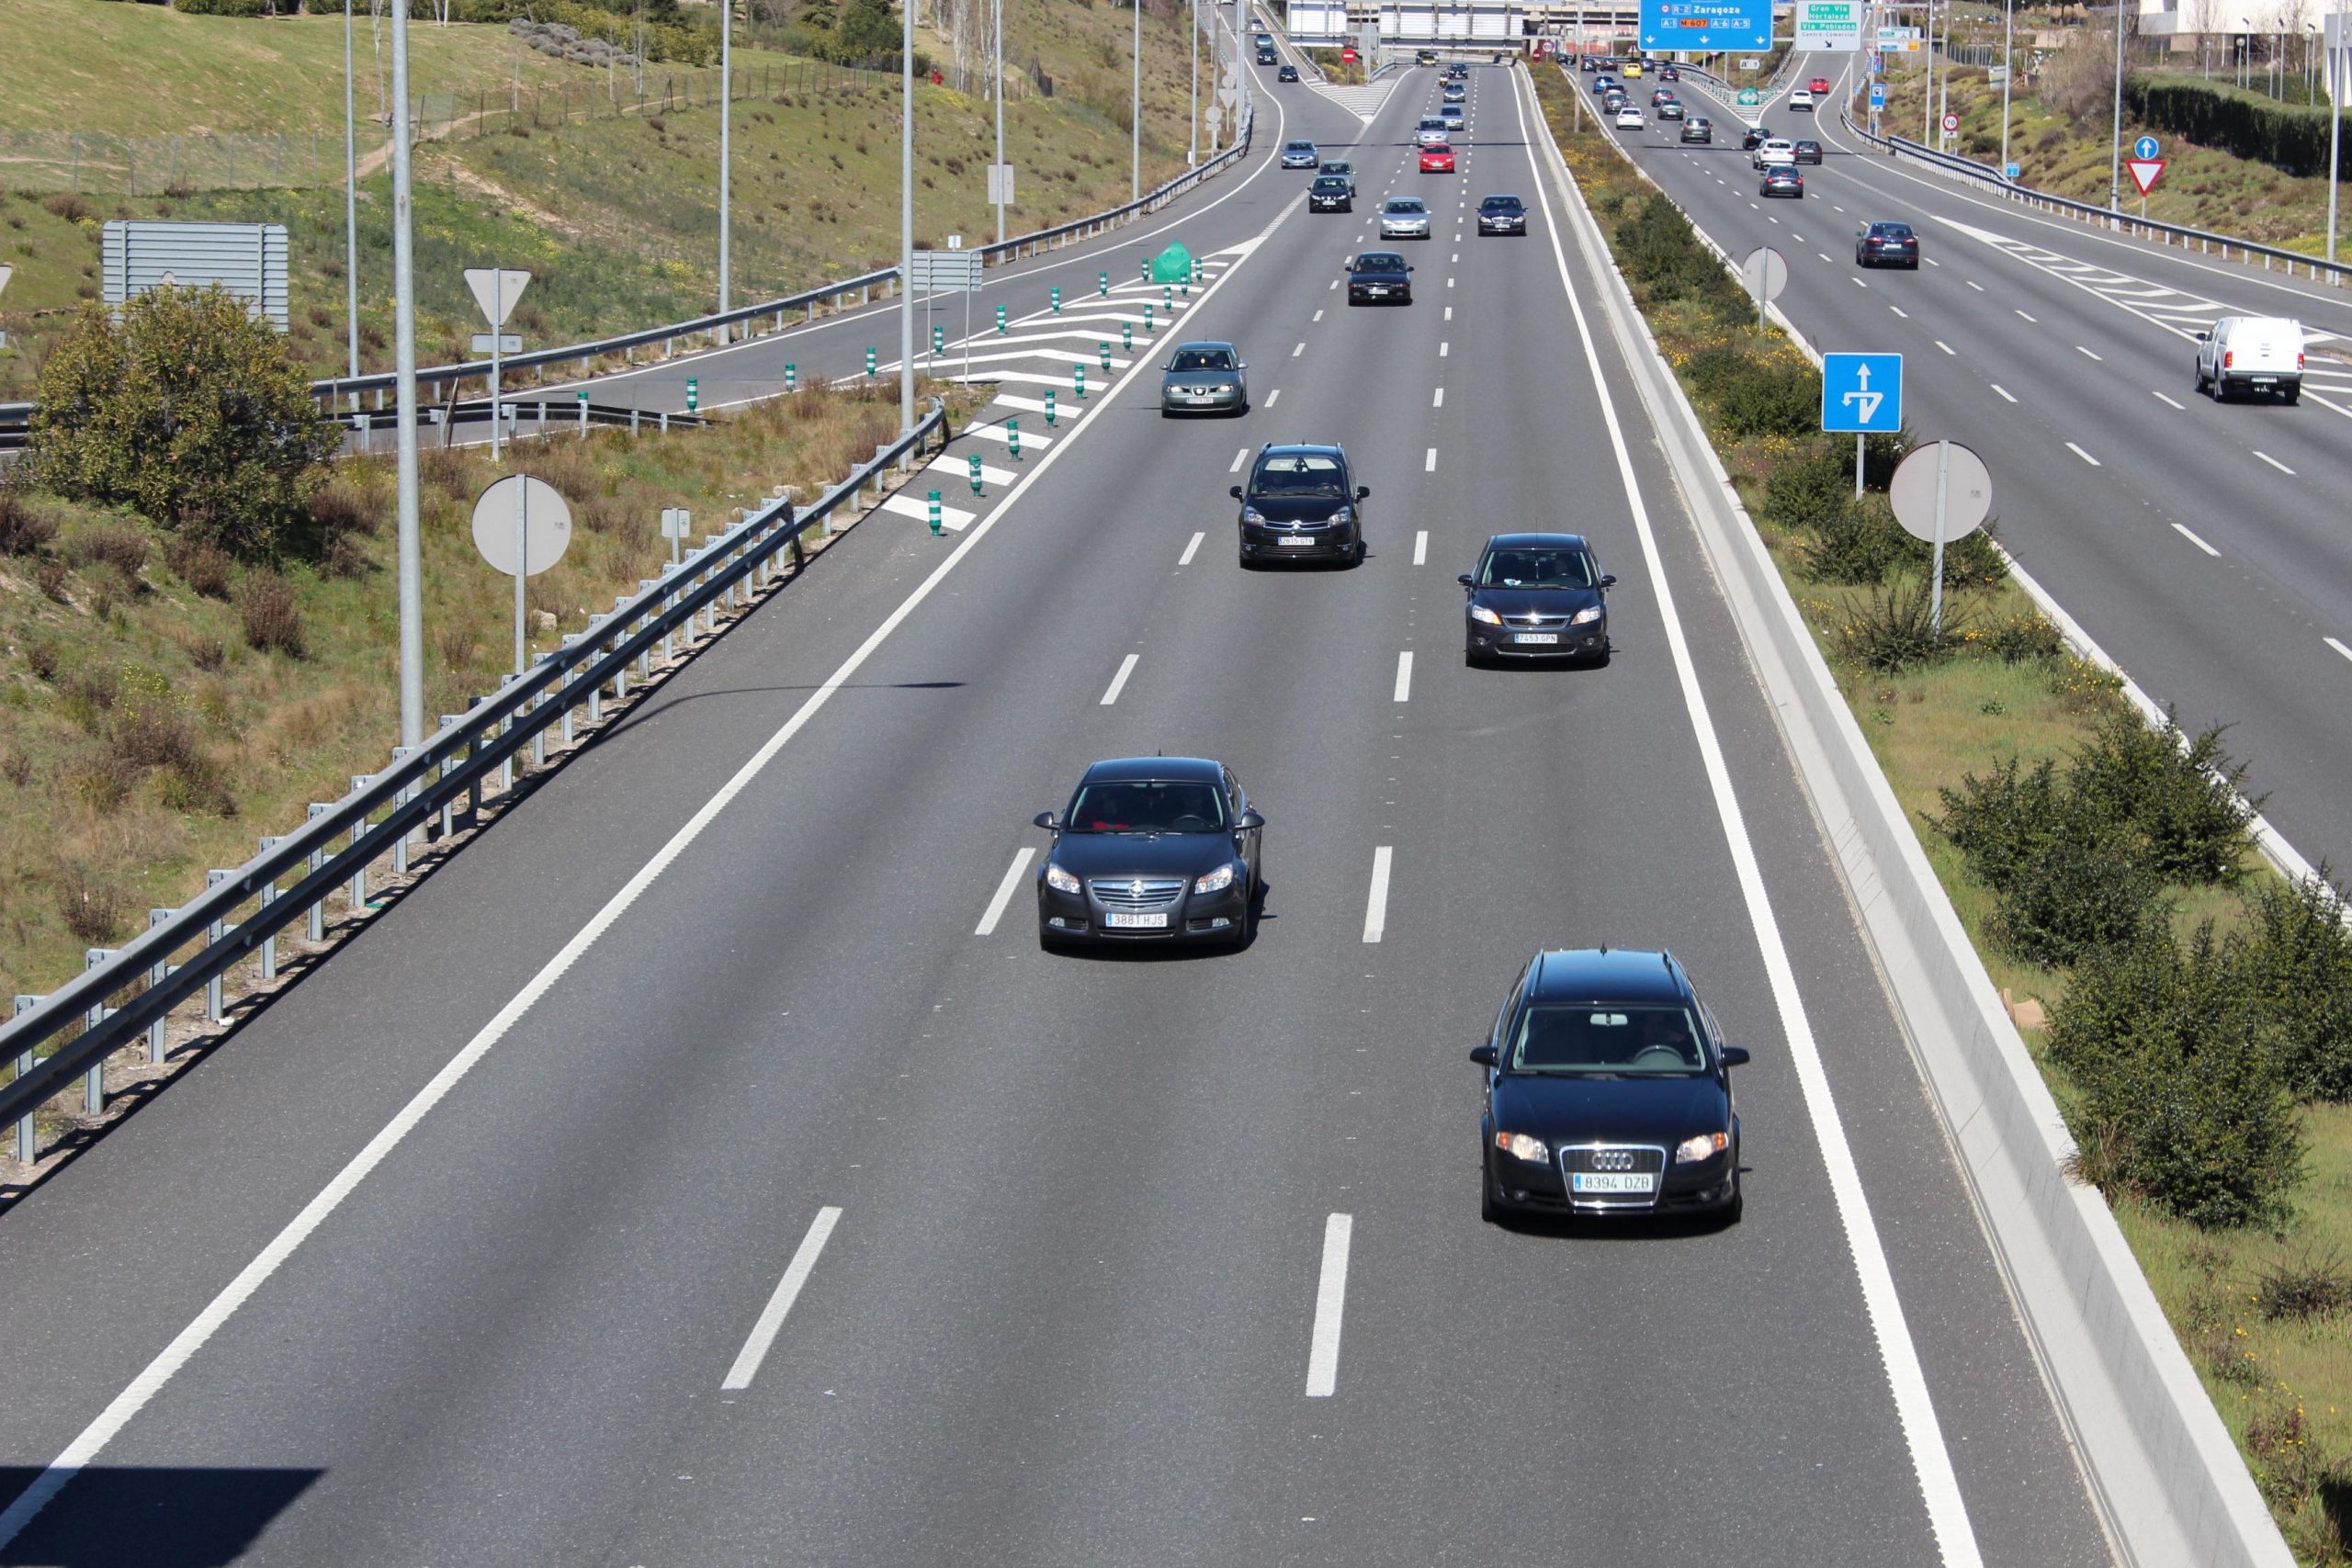 Portugal is set to remove tolls on roads that enter Spain via Andalucia, Galicia and elsewhere [Video]